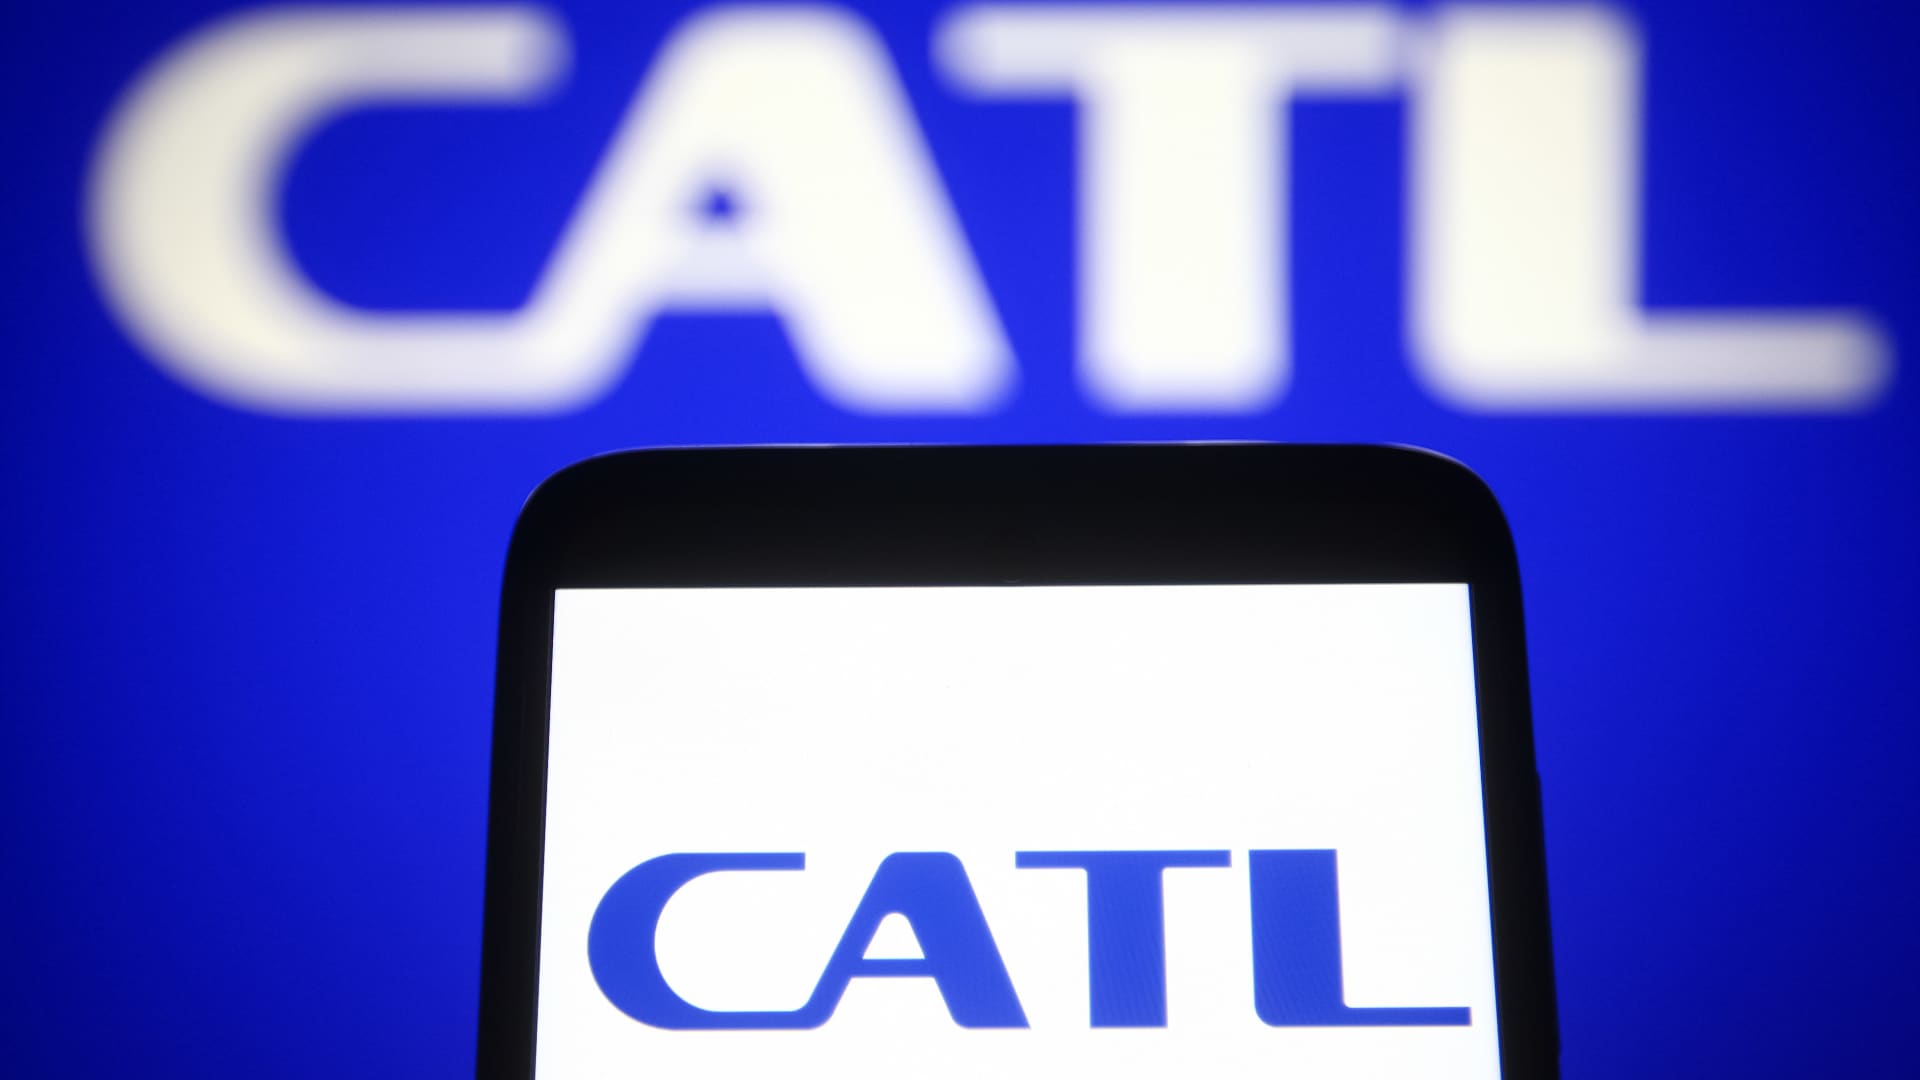 China’s CATL, a Tesla supplier, considers expanding battery swapping business overseas